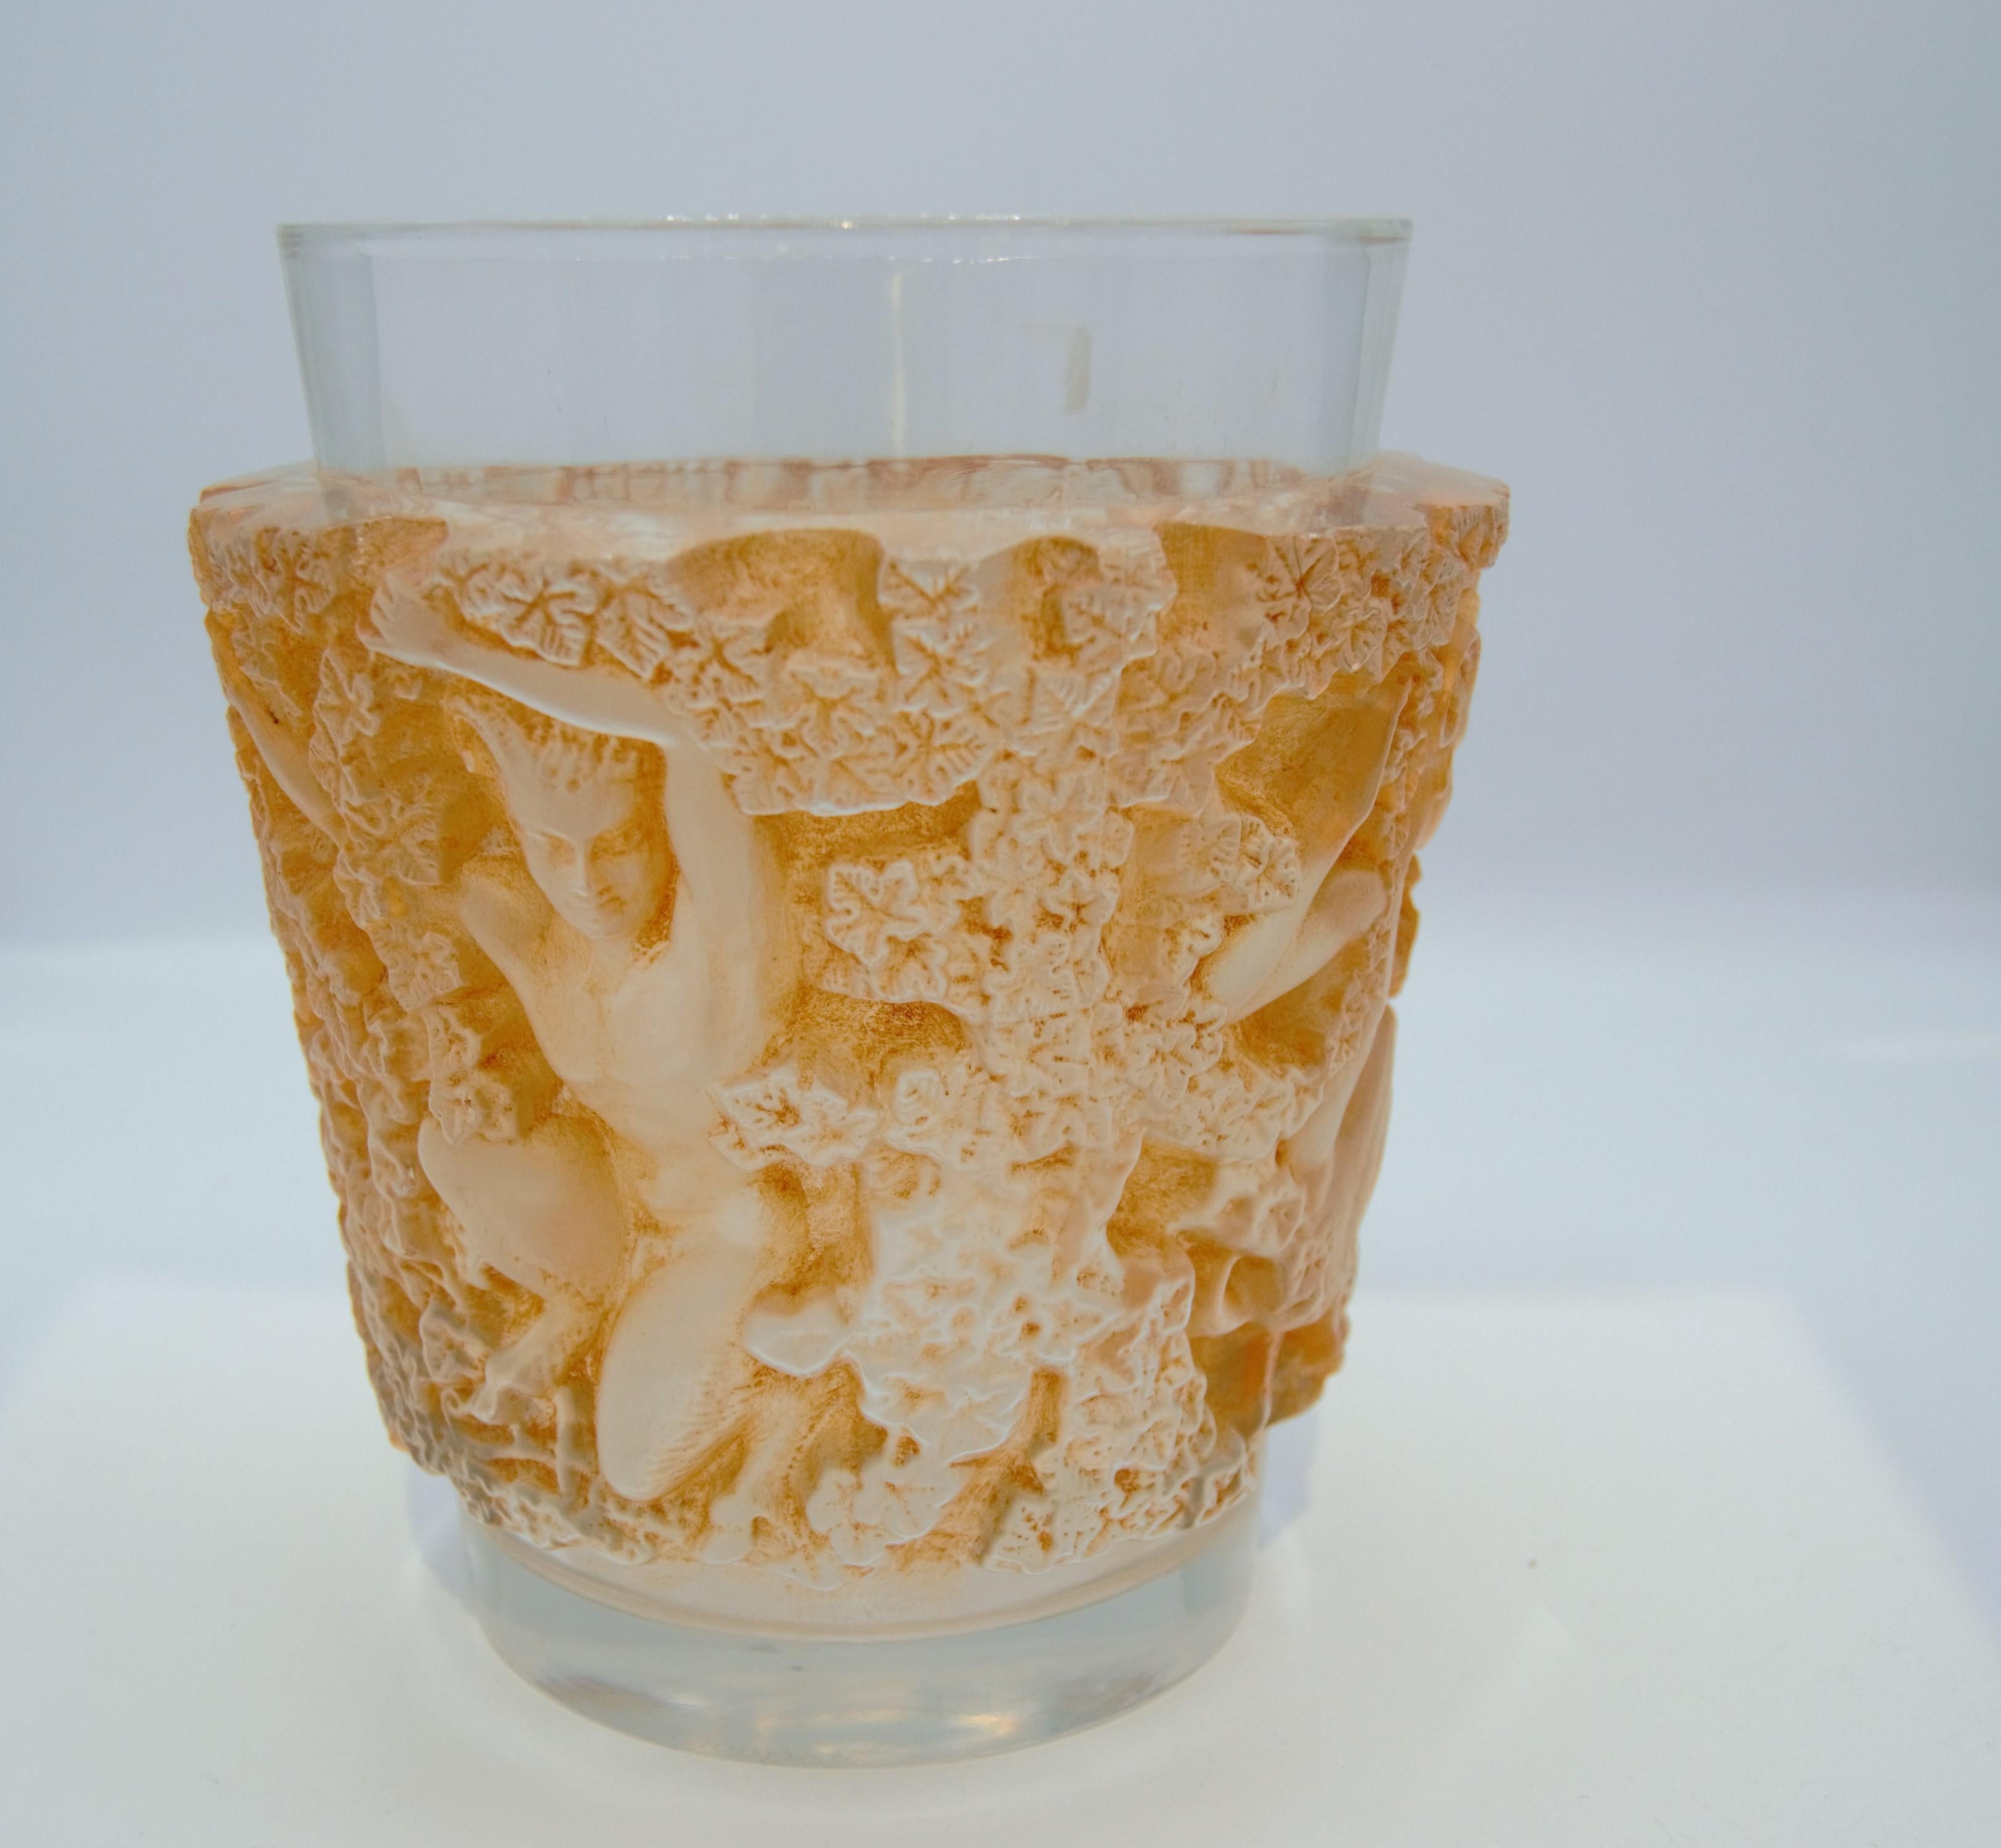 'Bacchus' a Lalique clear and frosted glass vase
No. 10-922, designed 1938, signed R. Lalique, France.
Moulded with fauns and trailing ivy, heightened in orange
Measures: 7 in. (18 cm.) height
Pan style figural motif.